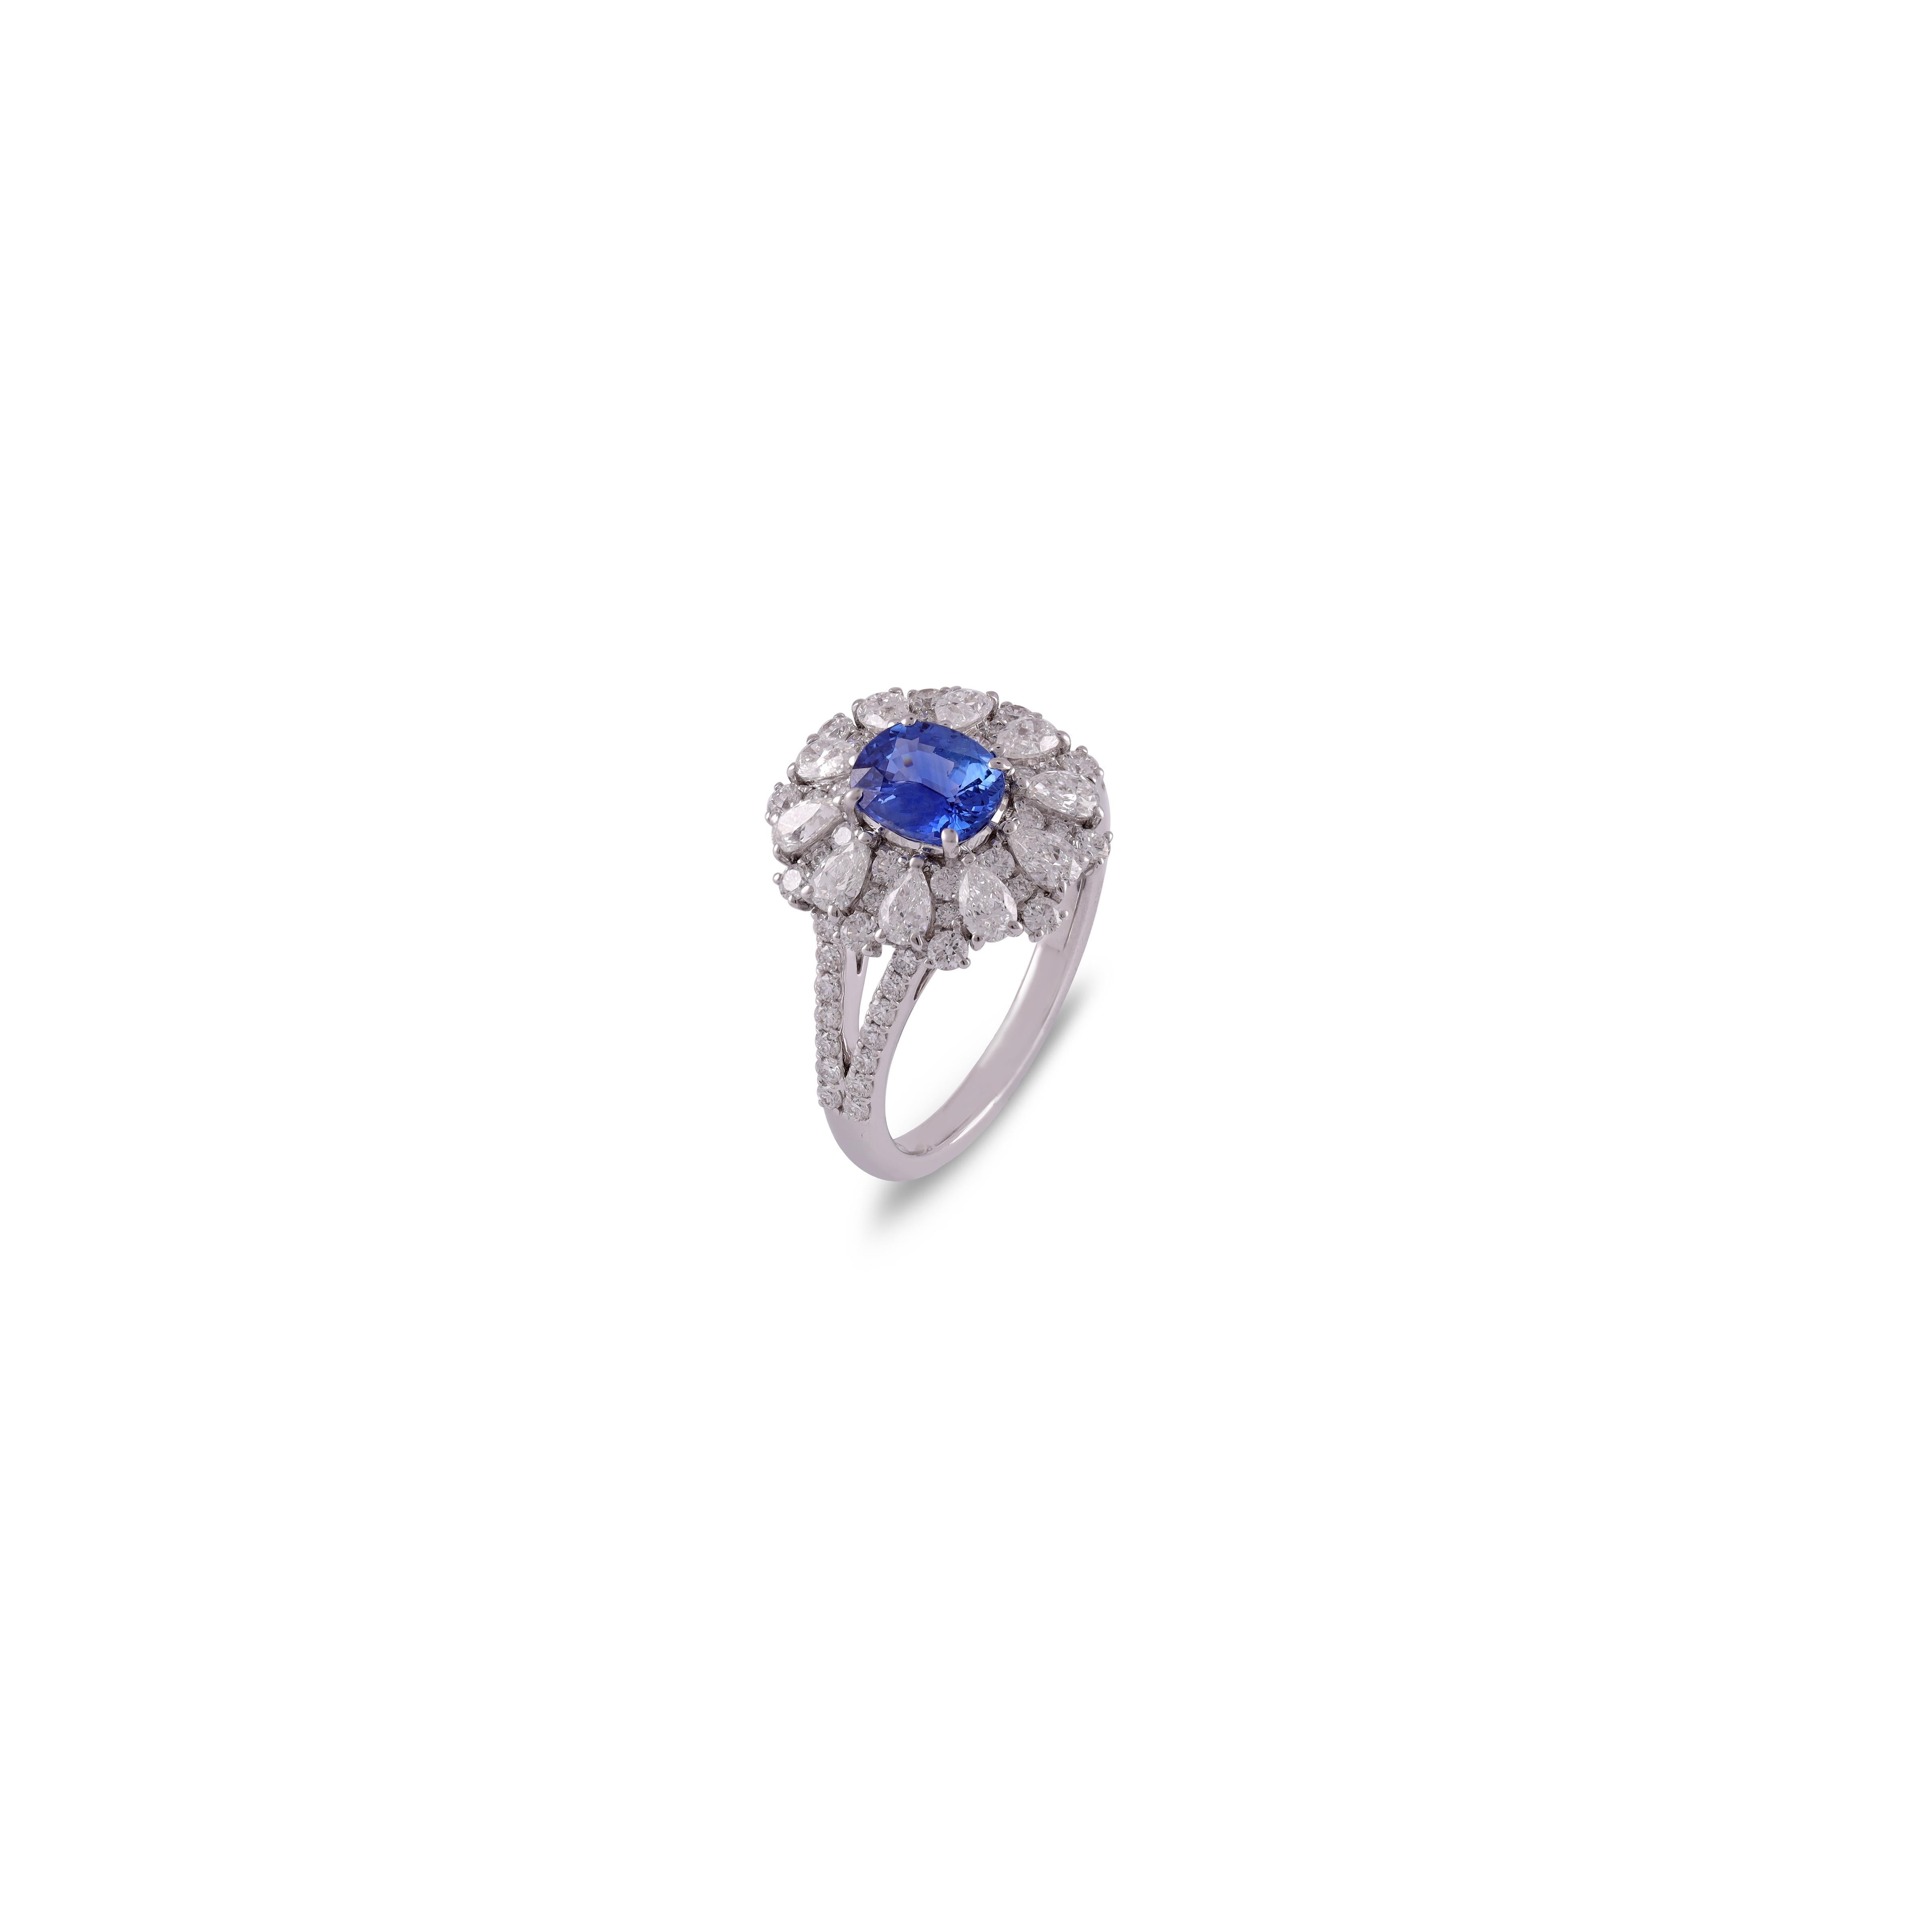 Oval Cut 1.13 Carat Blue Sapphire and Diamond Ring in 18 Karat White Gold For Sale